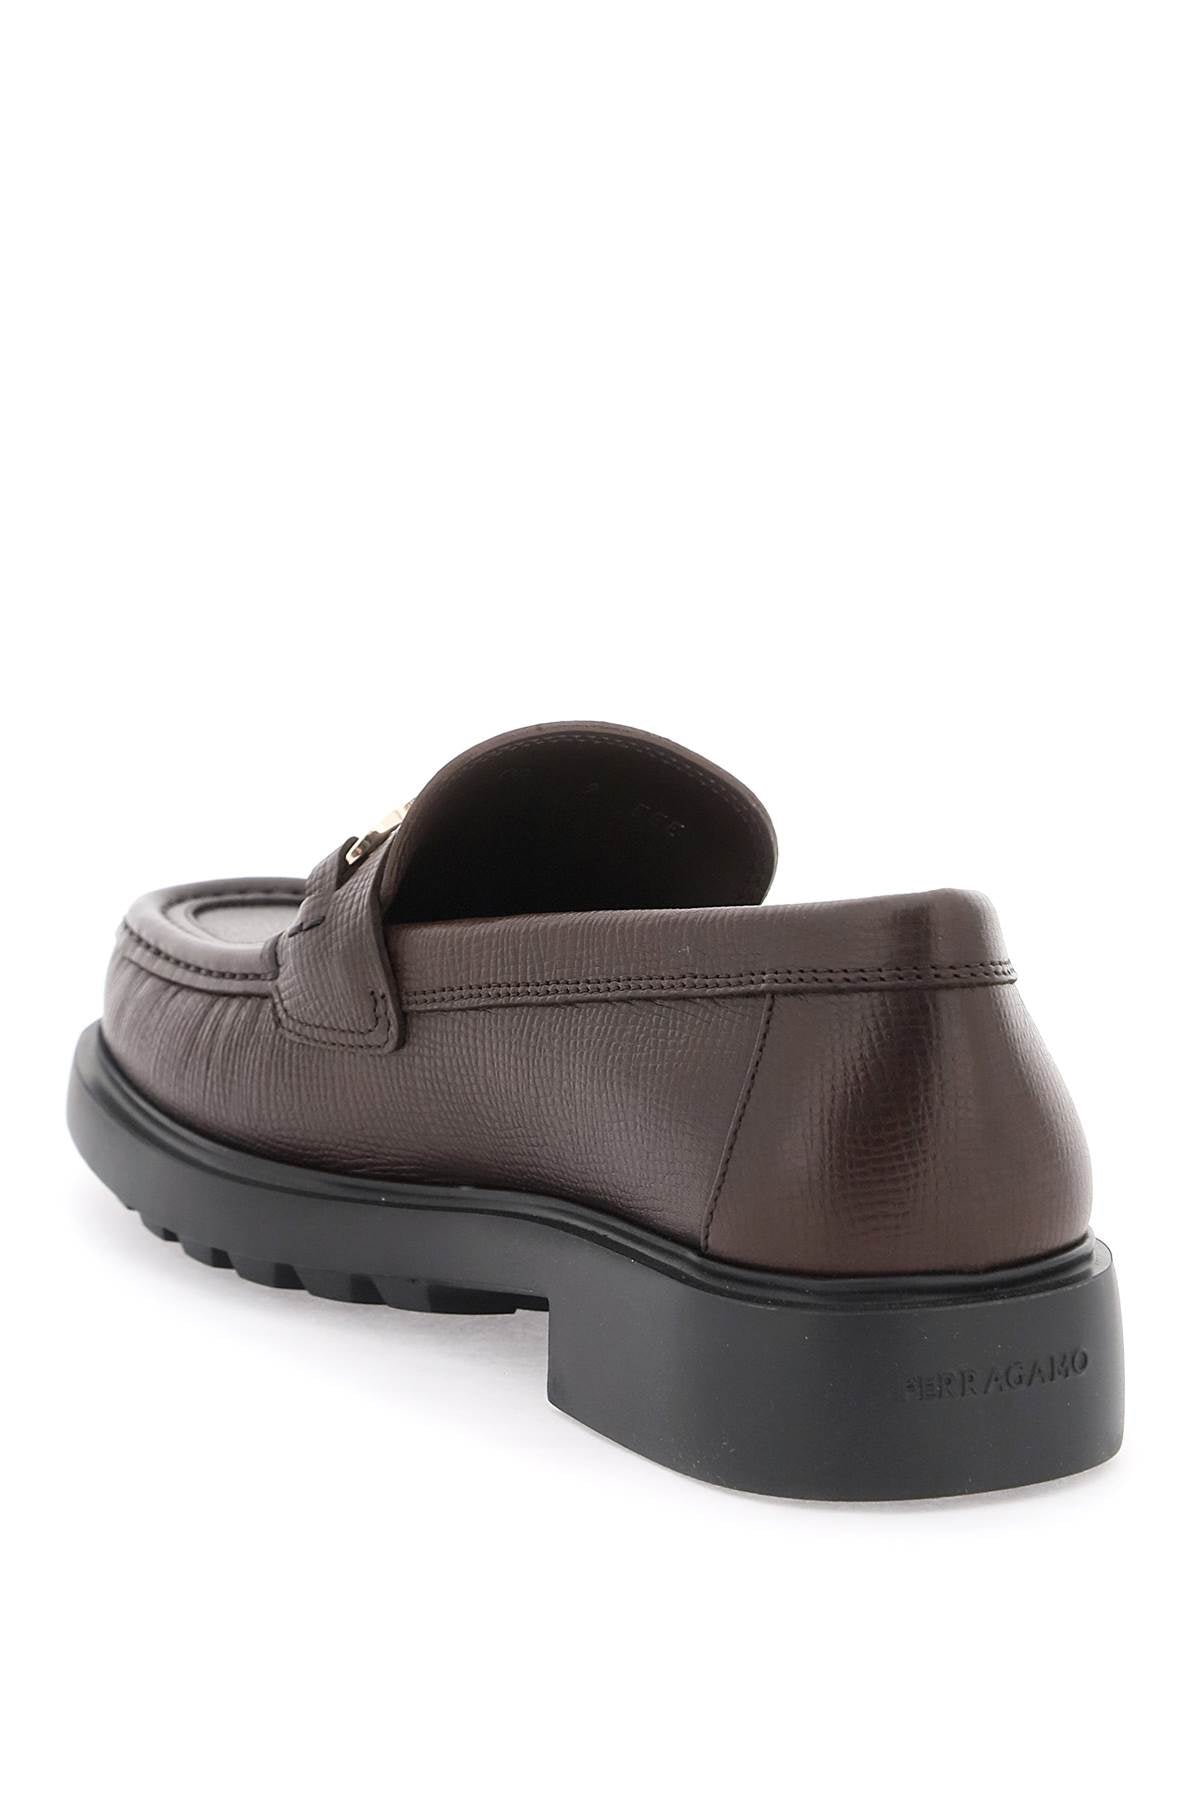 FERRAGAMO Embossed Leather Loafers with Gancini Hook for Men in Brown - SS24 Collection